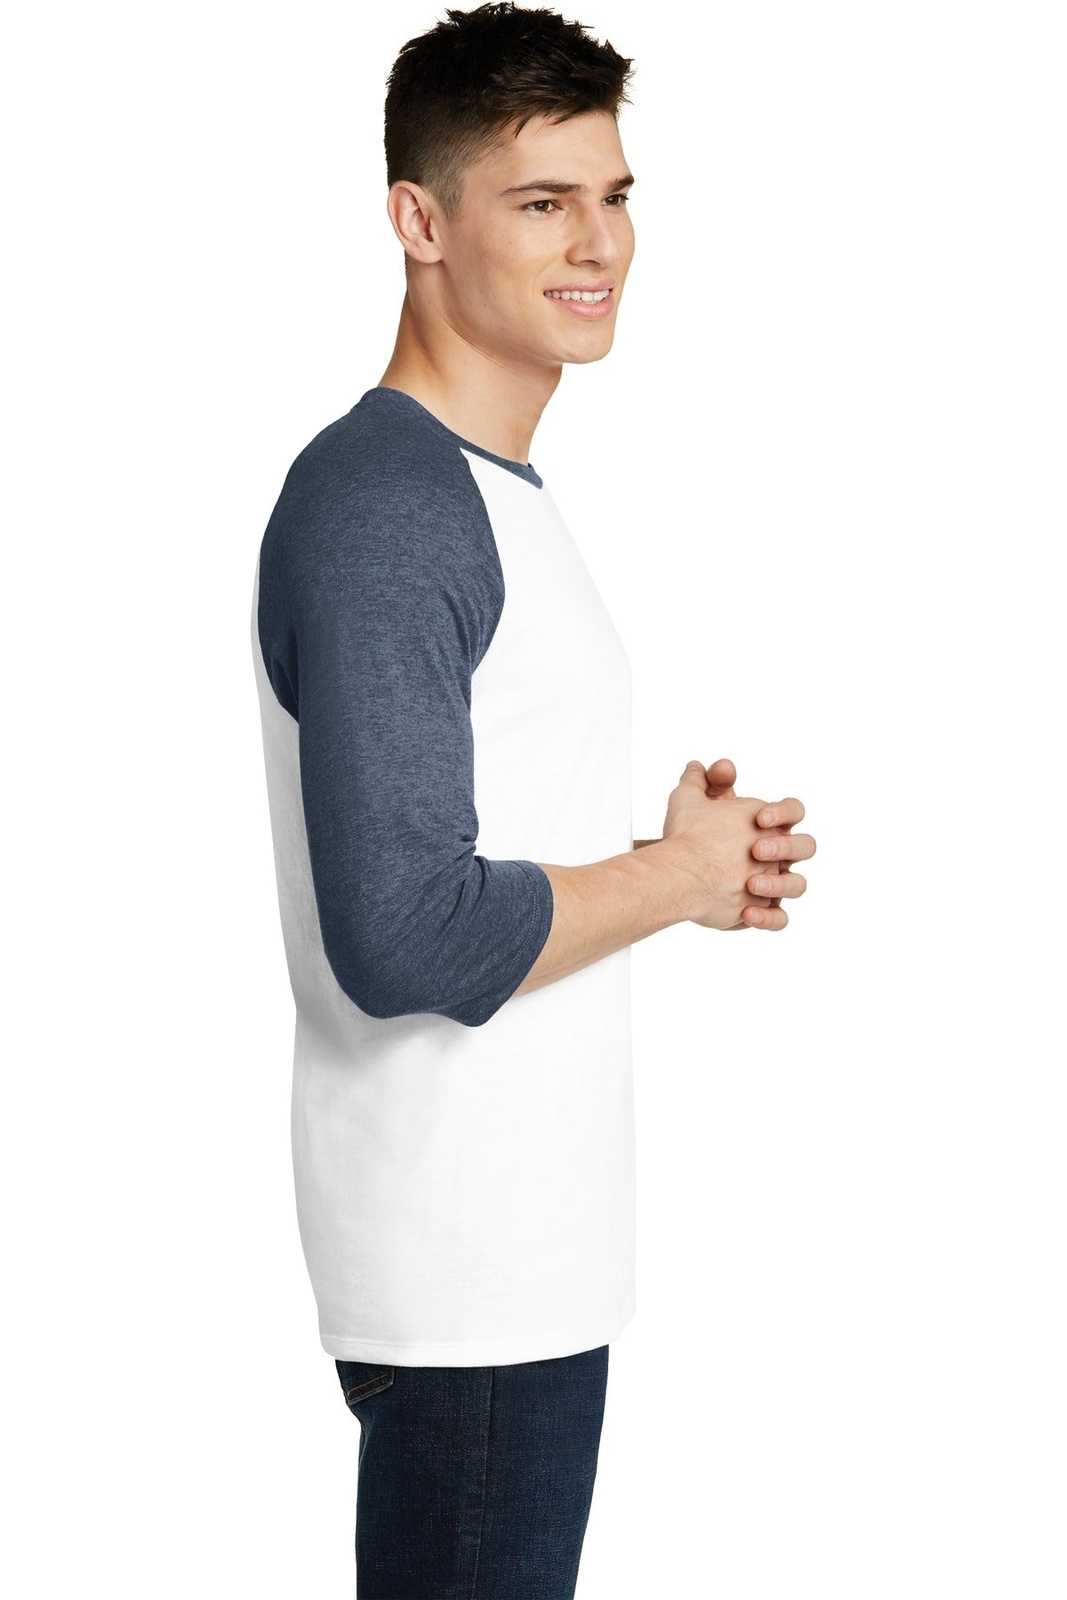 District DT6210 Very Important Tee 3/4-Sleeve Raglan - Heathered Navy White - HIT a Double - 3